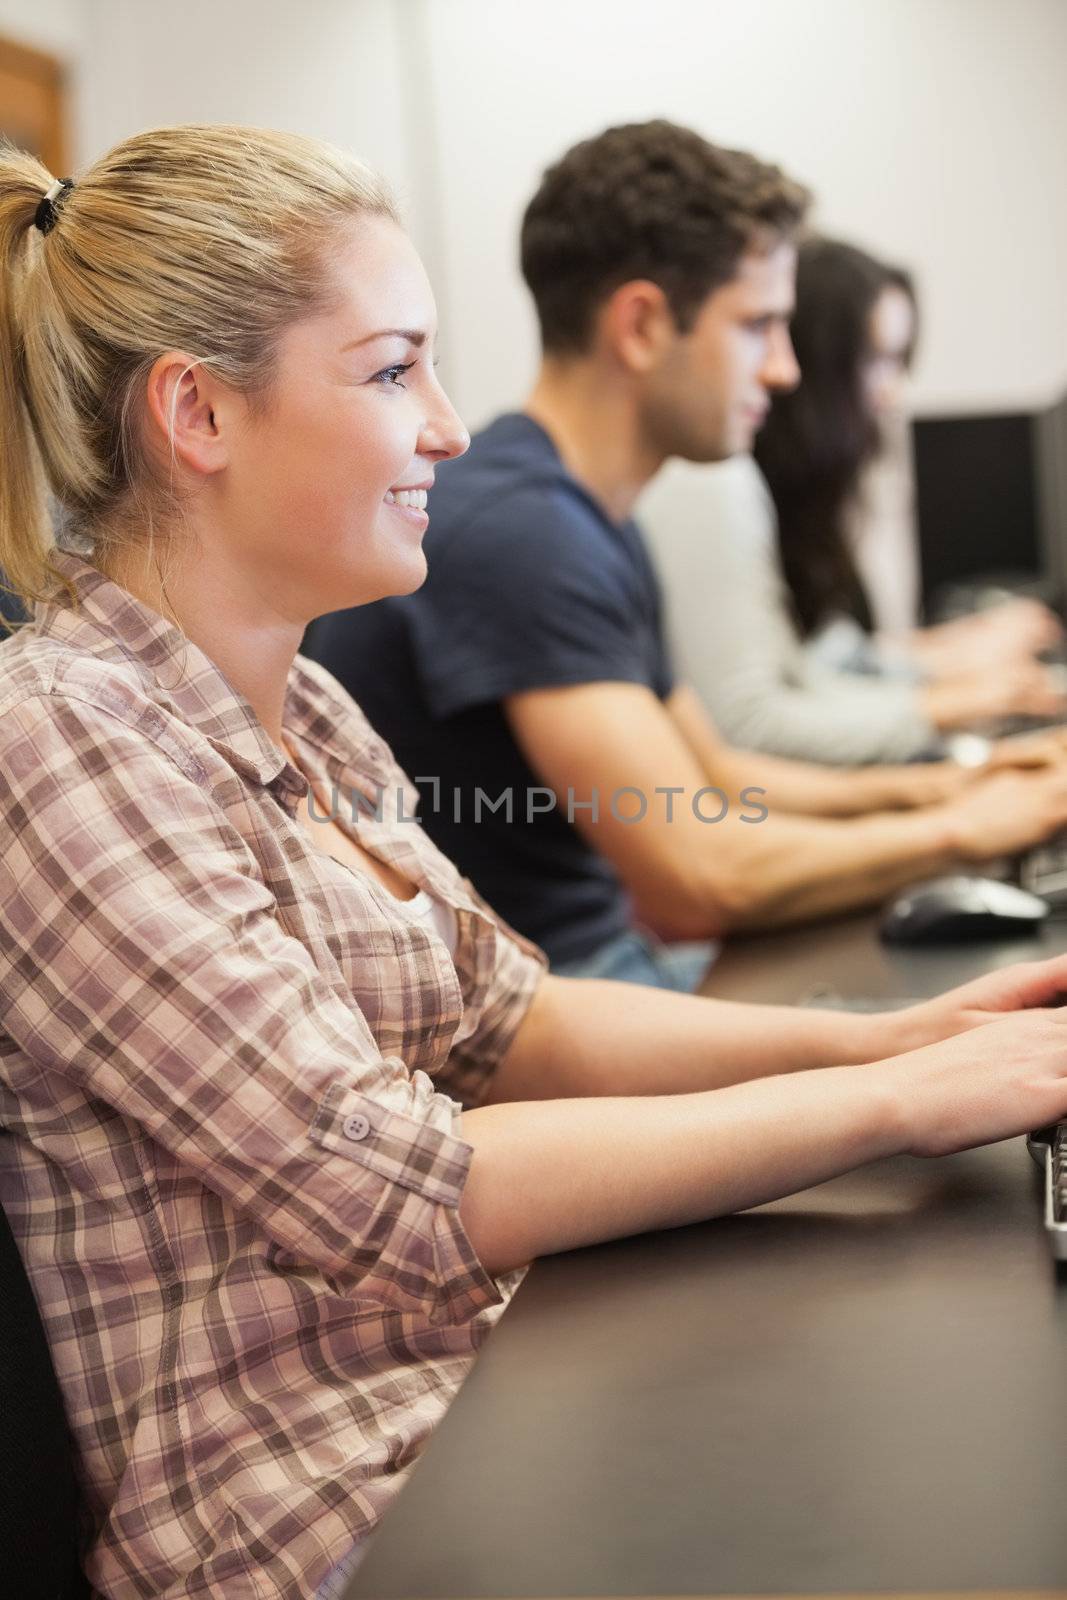 Woman sitting typing and smiling at computer class